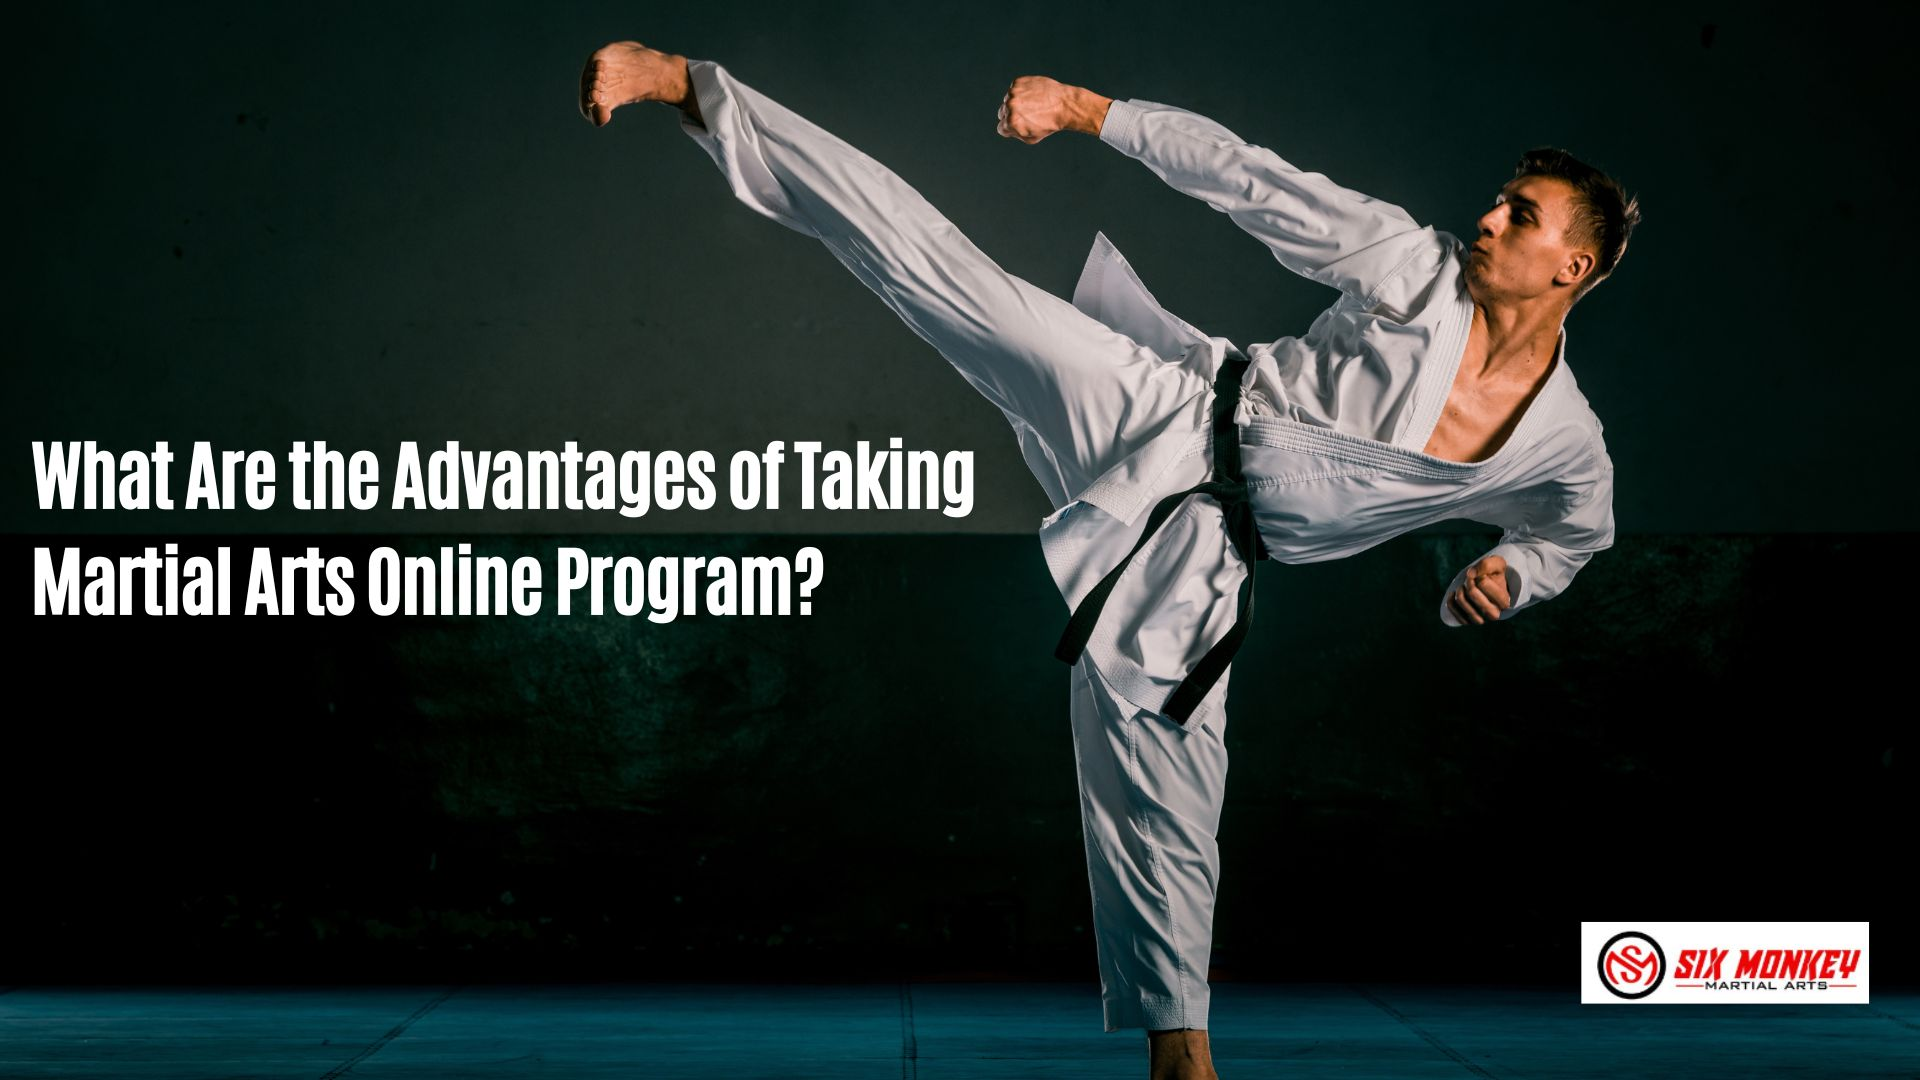 What Are the Advantages of Taking Martial Arts Online Program?